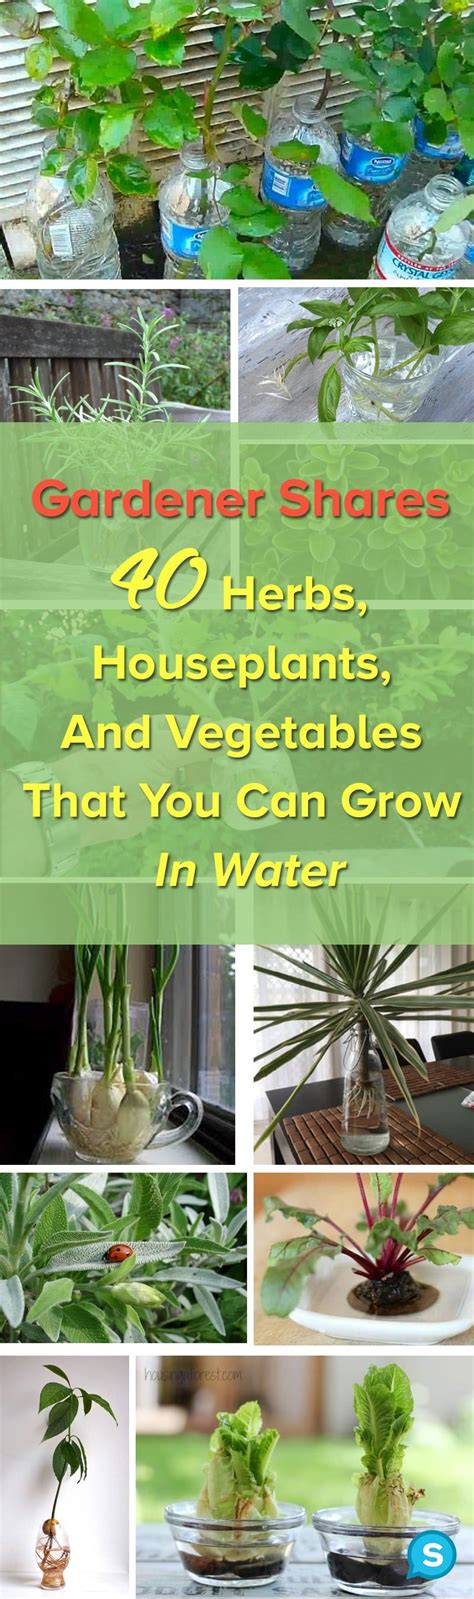 You don't need soil to garden. Here are 40 herbs, houseplants, and ...